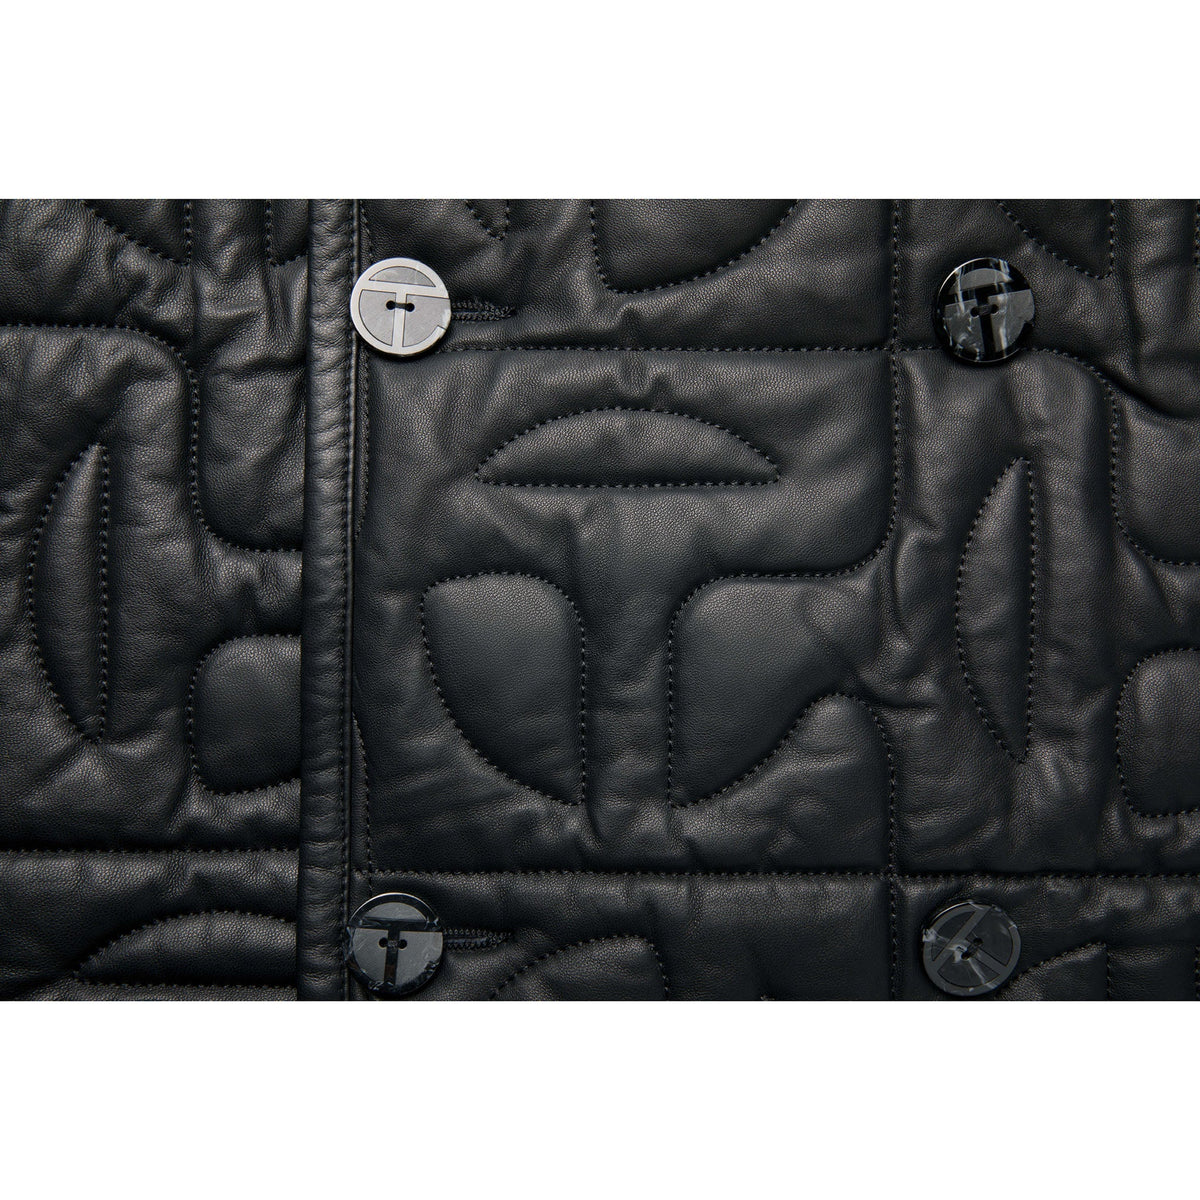 Moose Knuckles x Telfar Quilted Peacoat - Leather